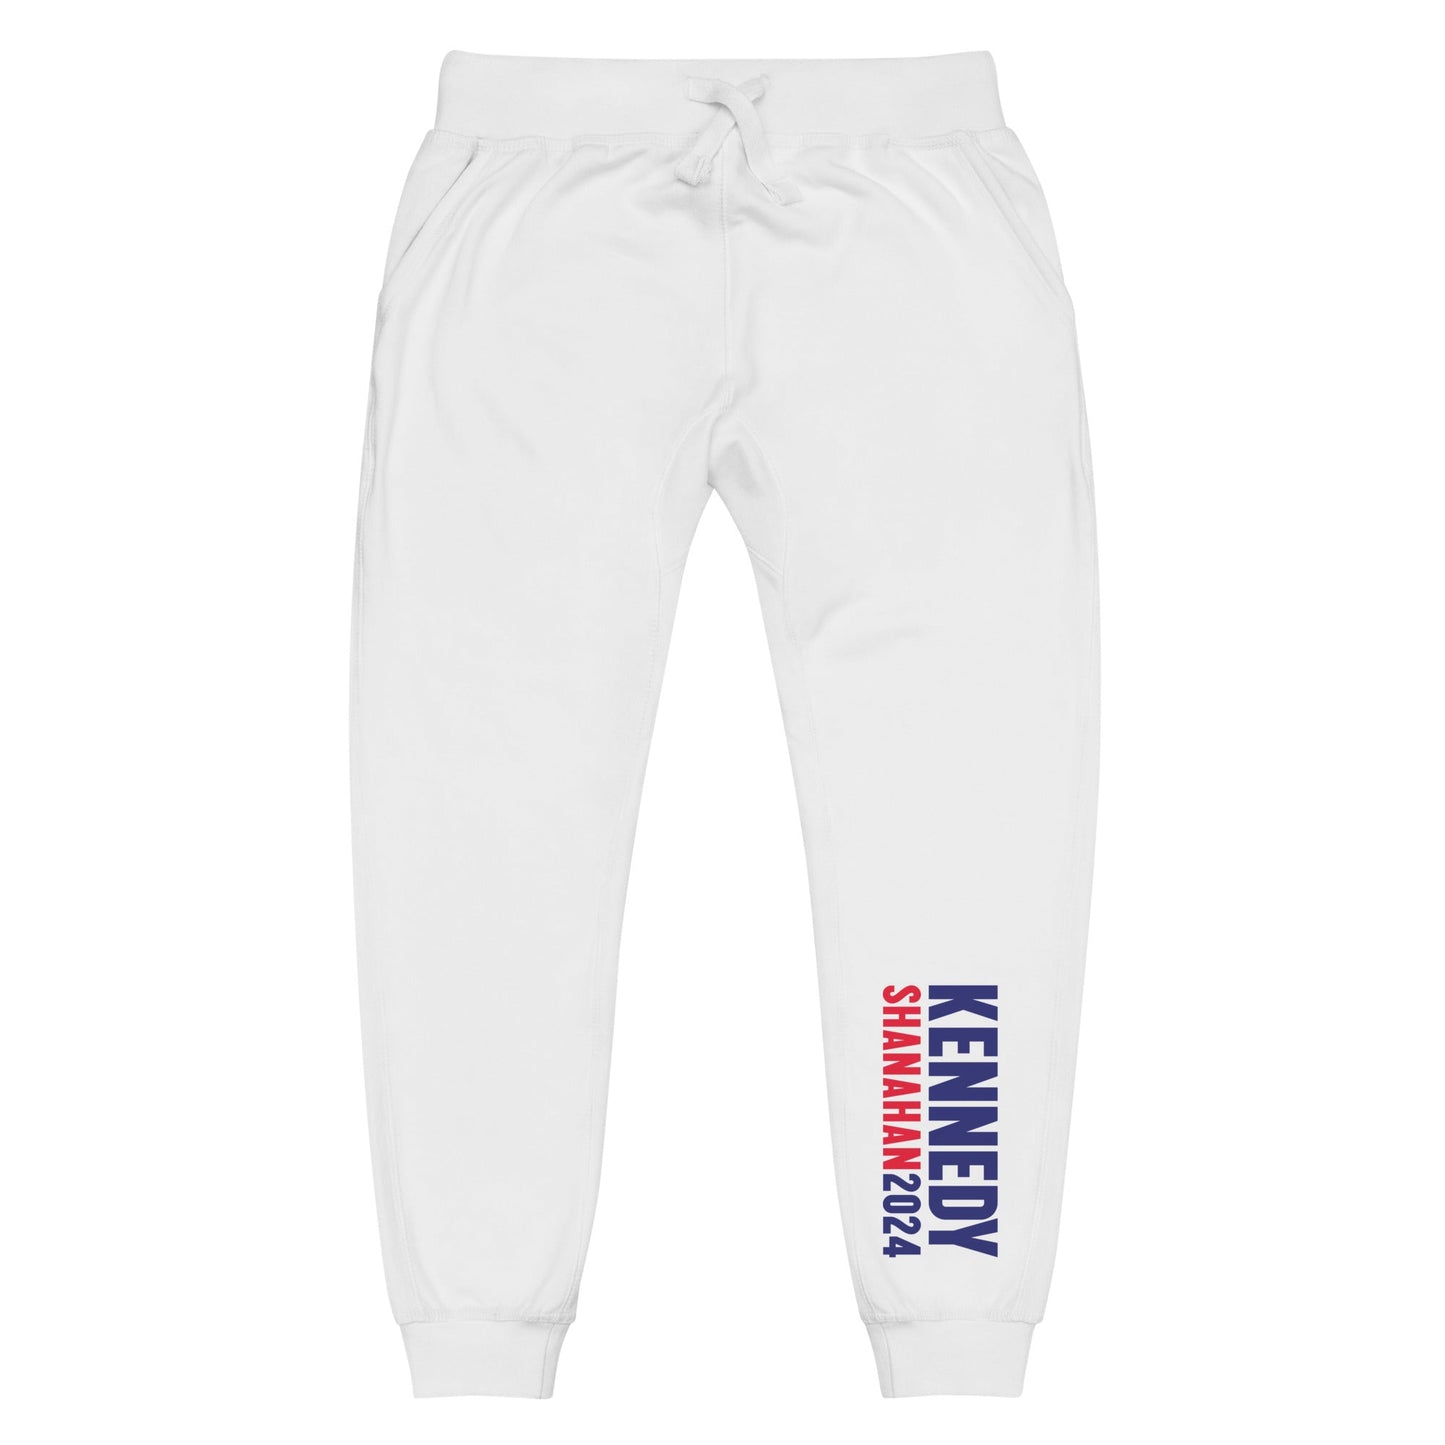 Kennedy x Shanahan Unisex Sweatpants - TEAM KENNEDY. All rights reserved